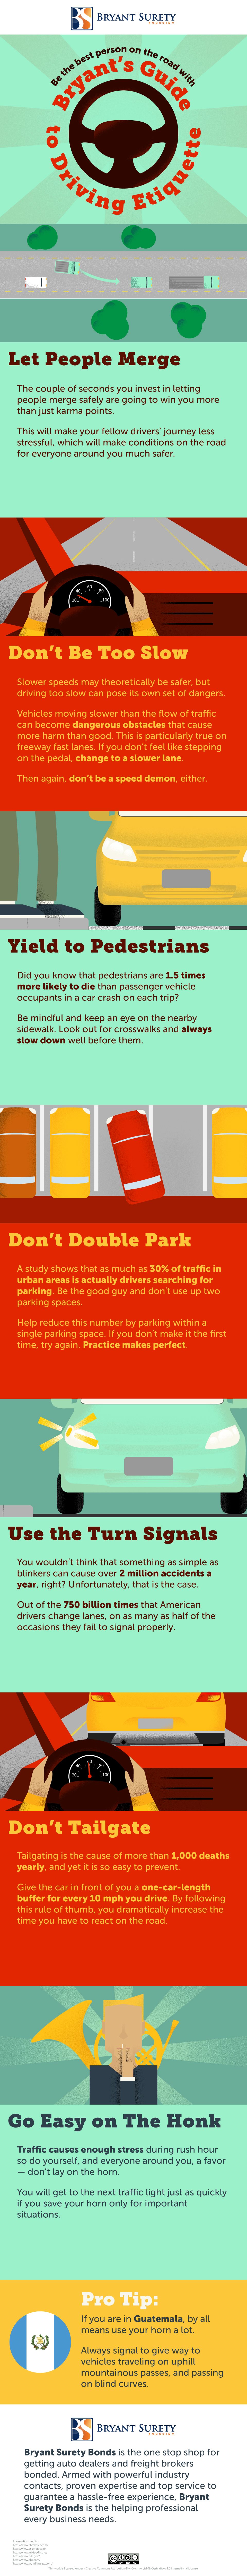 Infographic about the driving etiquette on and off the road.